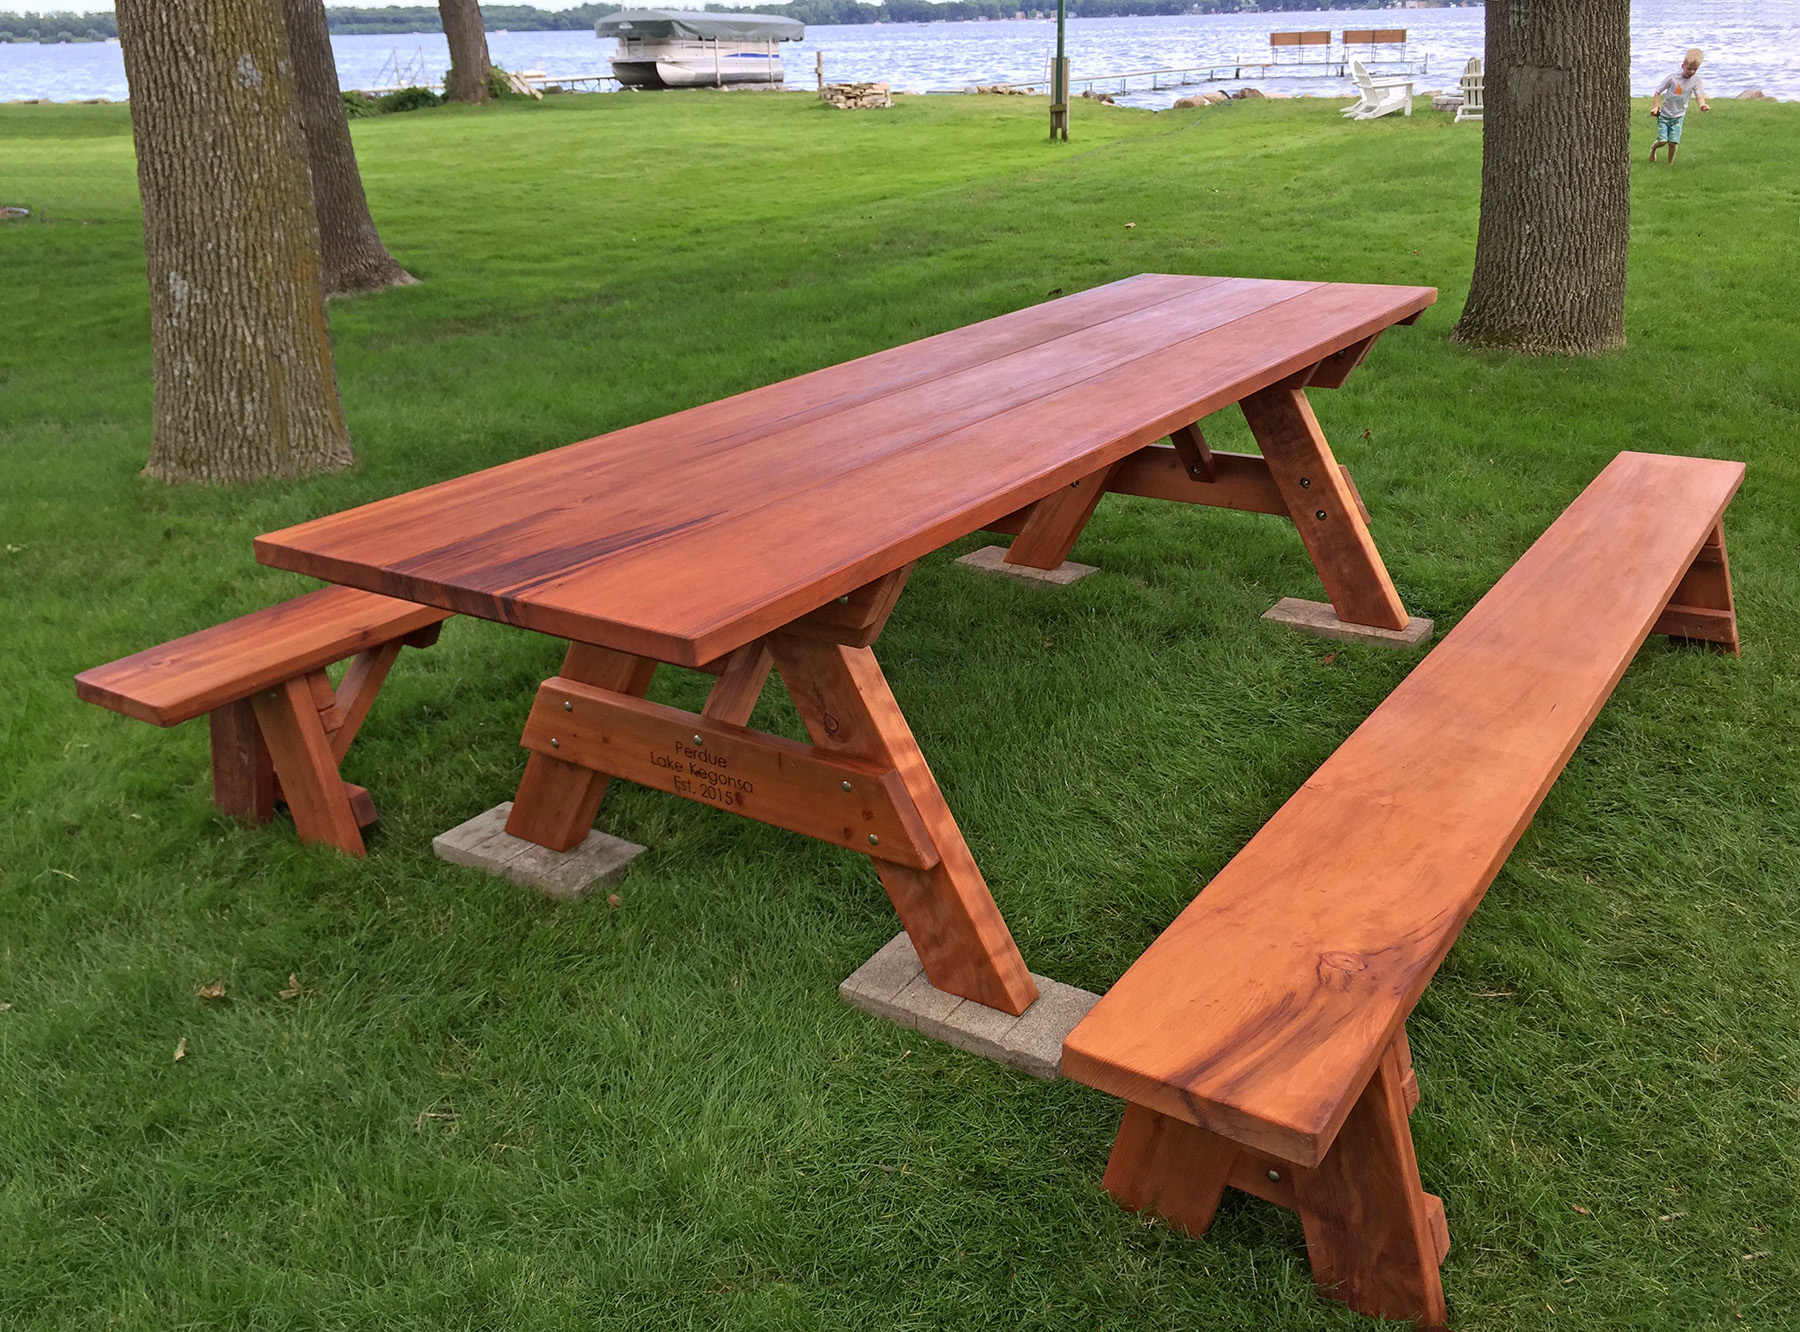 Wooden picnic table and benches